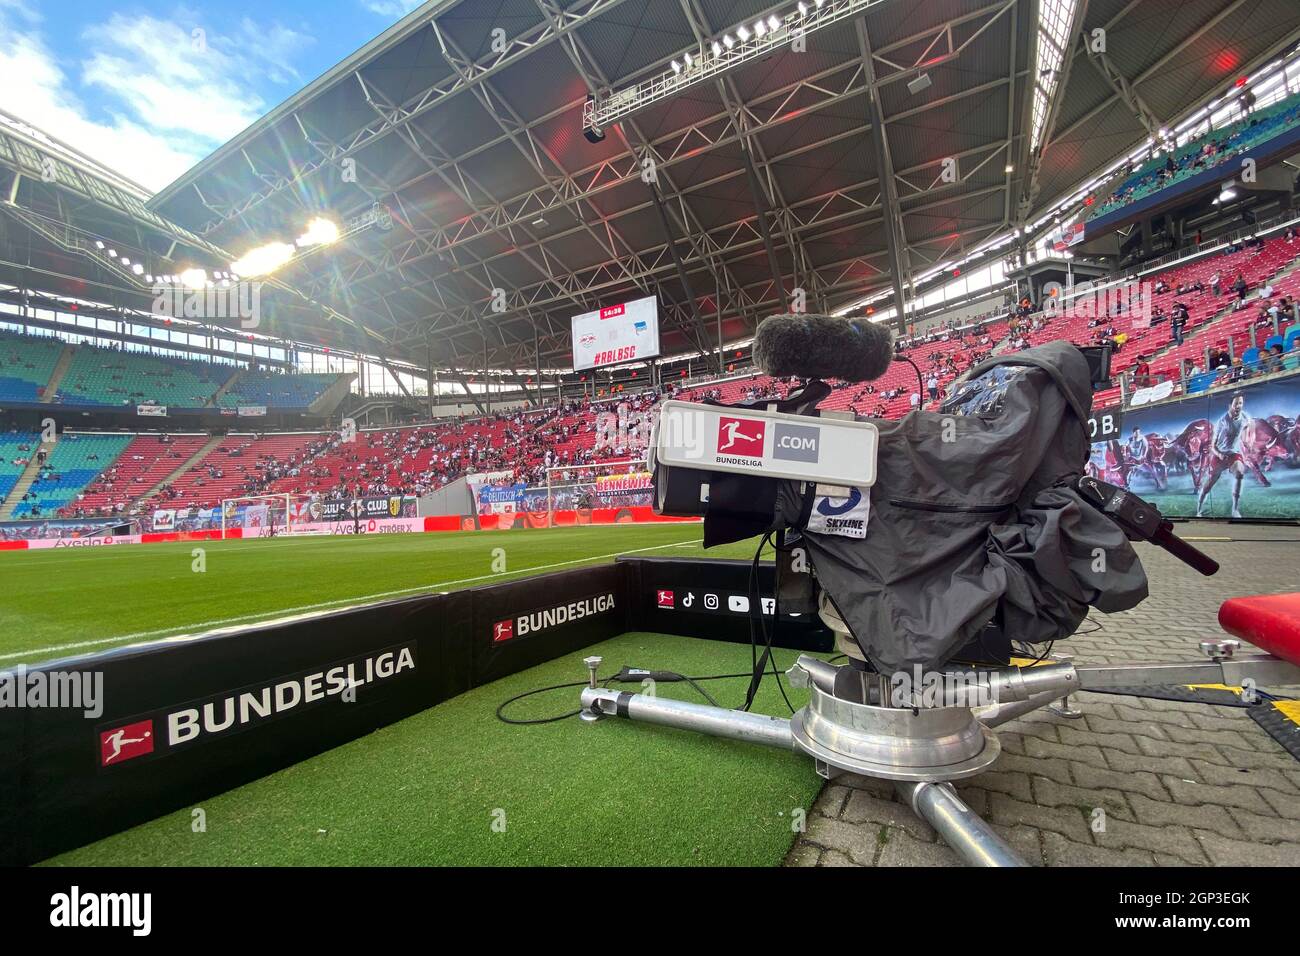 Sportcast High Resolution Stock Photography and Images - Alamy